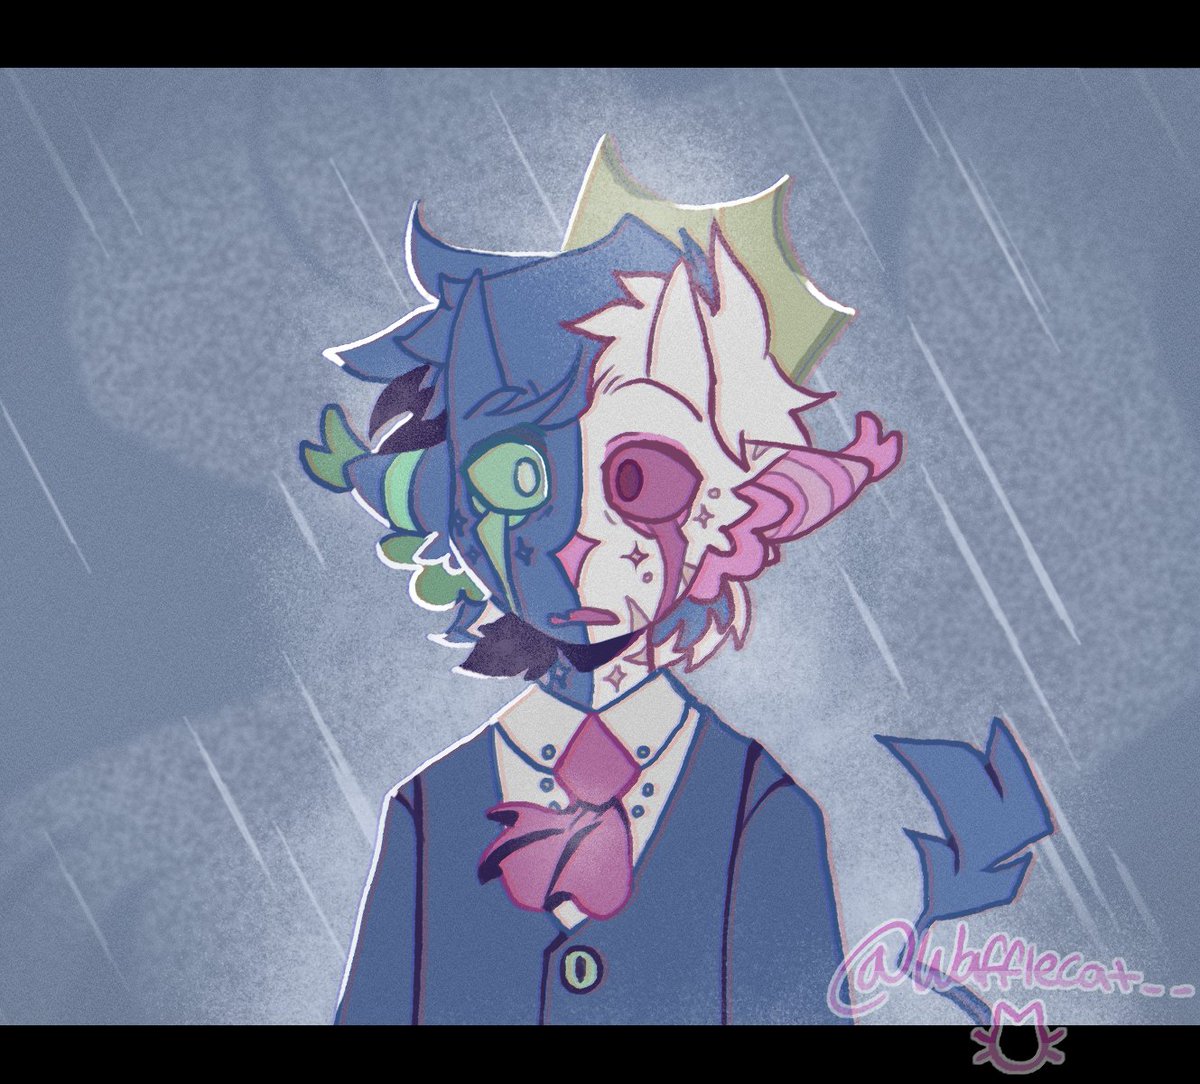 | scared of the rain |
did a Vibrant Eyes redraw!! check out the song it's rlly good,,

untag in replies please!! :-]

#ranboofanart #vibranteyes #vibranteyesredraw